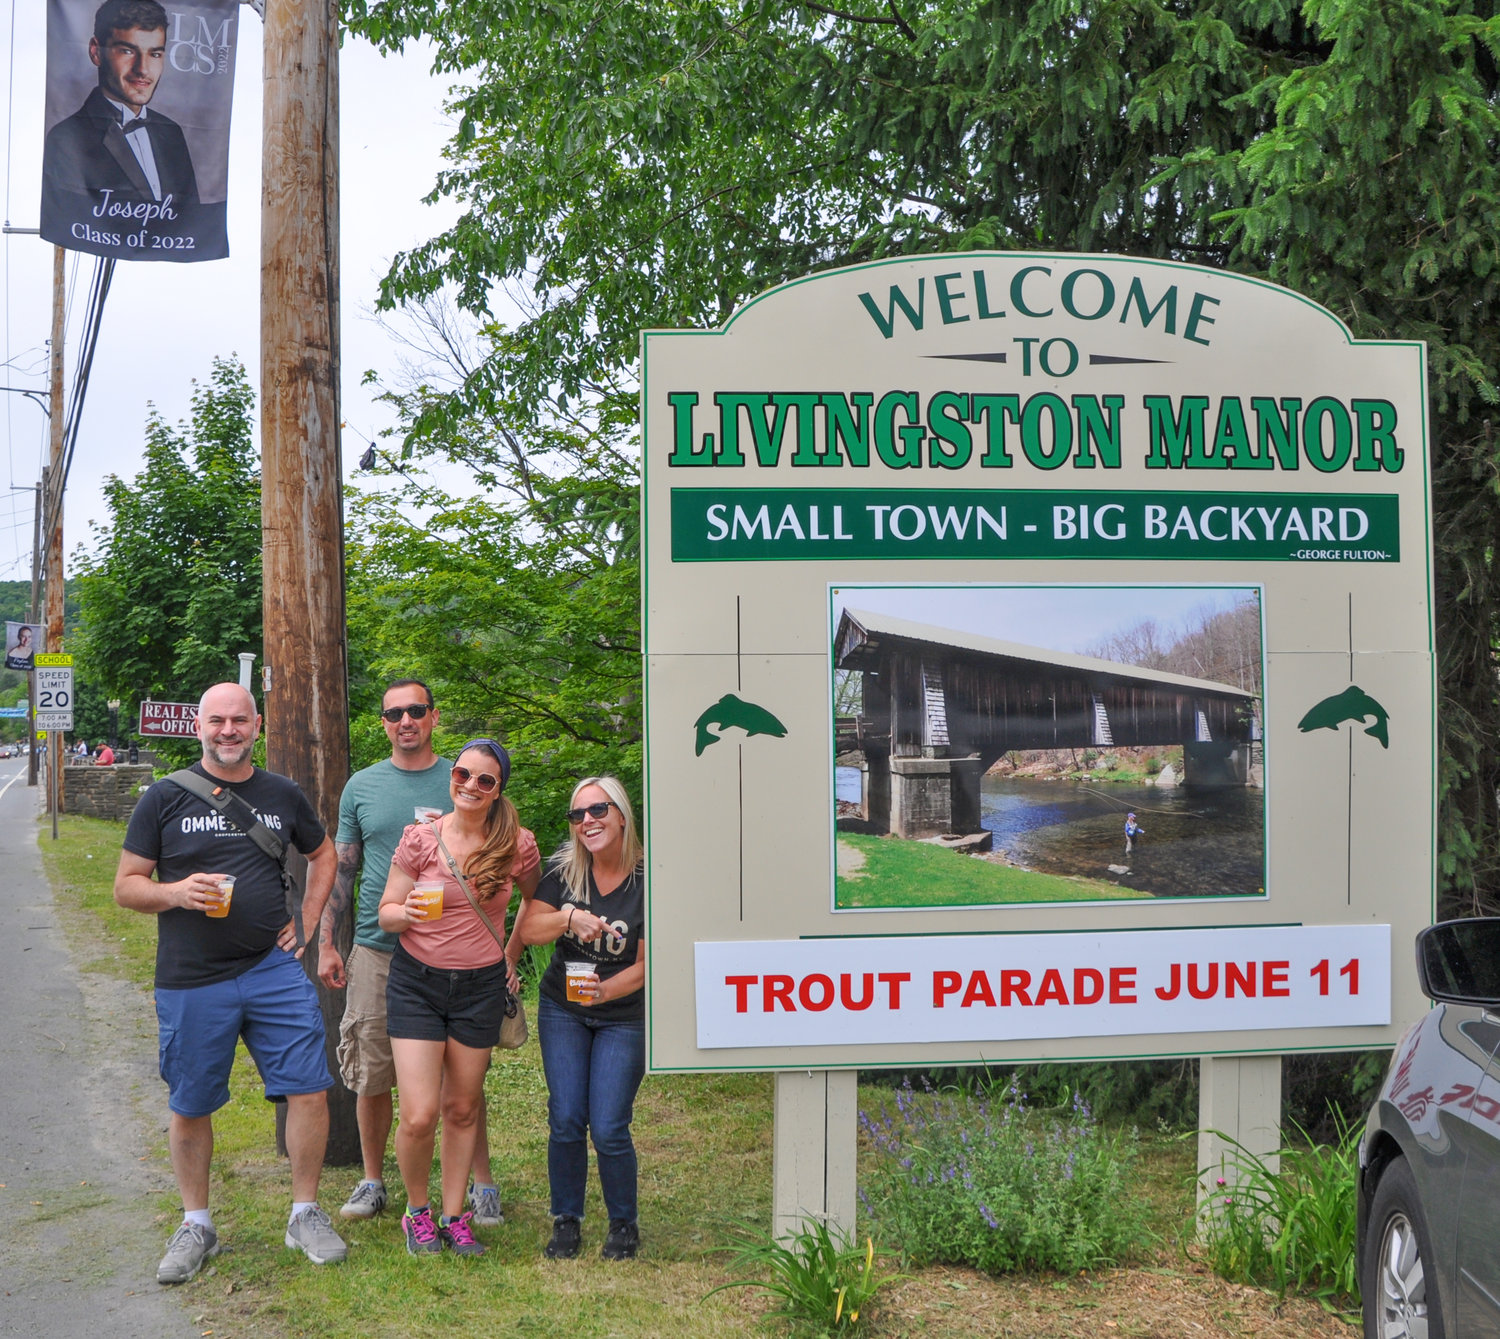 Kathleen Richards, Pete Cozeolino, Amanda Dubester and Andrew Bellone (in no particular order) were excited to be visiting the Manor for their very first Trout Parade. "We'll definitely be back!" they enthused, even before the fishy fun had begun to swim down Main Street.